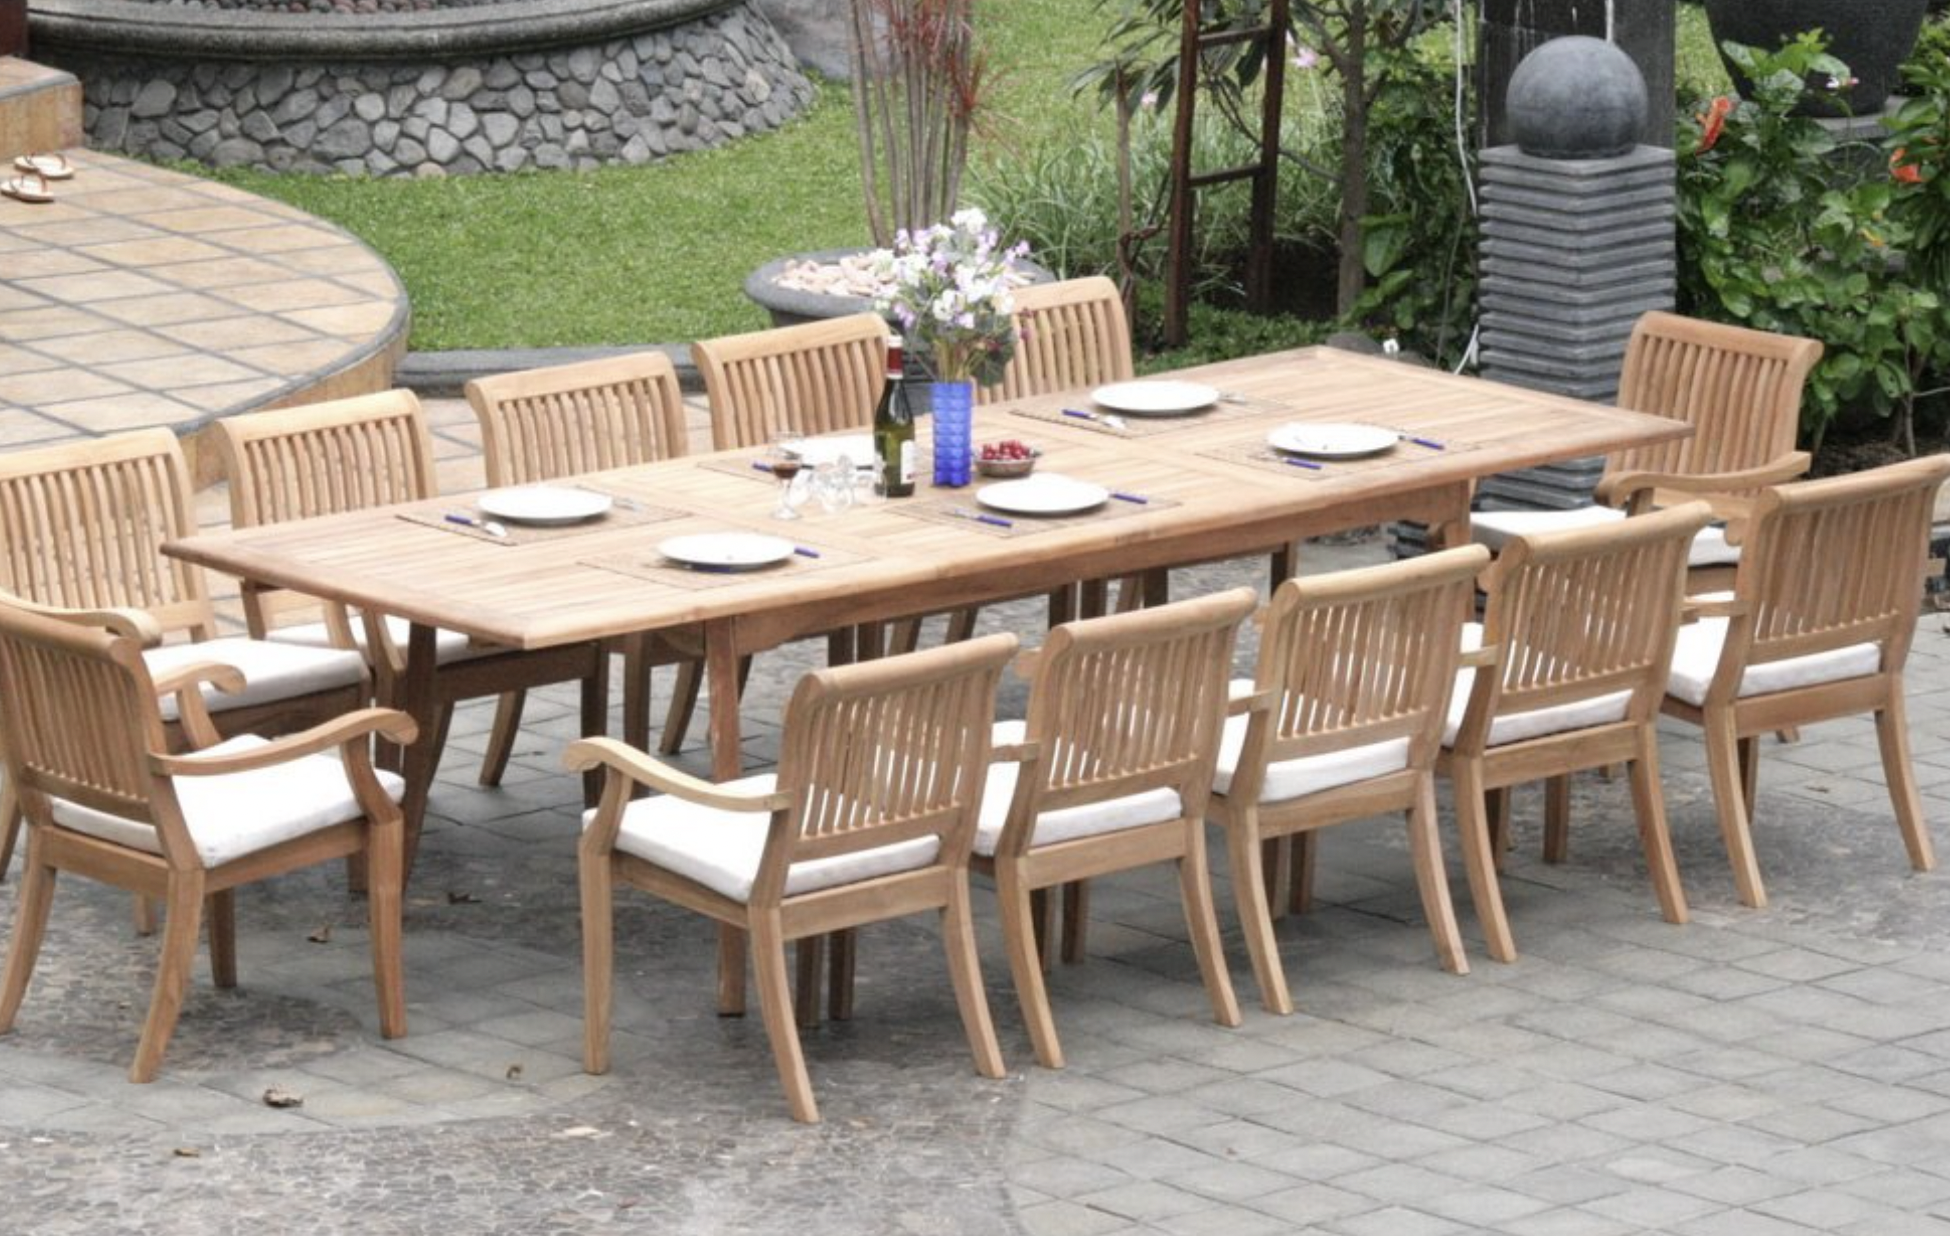 Ing An Extendable Dining Table, Extendable Outdoor Dining Table For 12